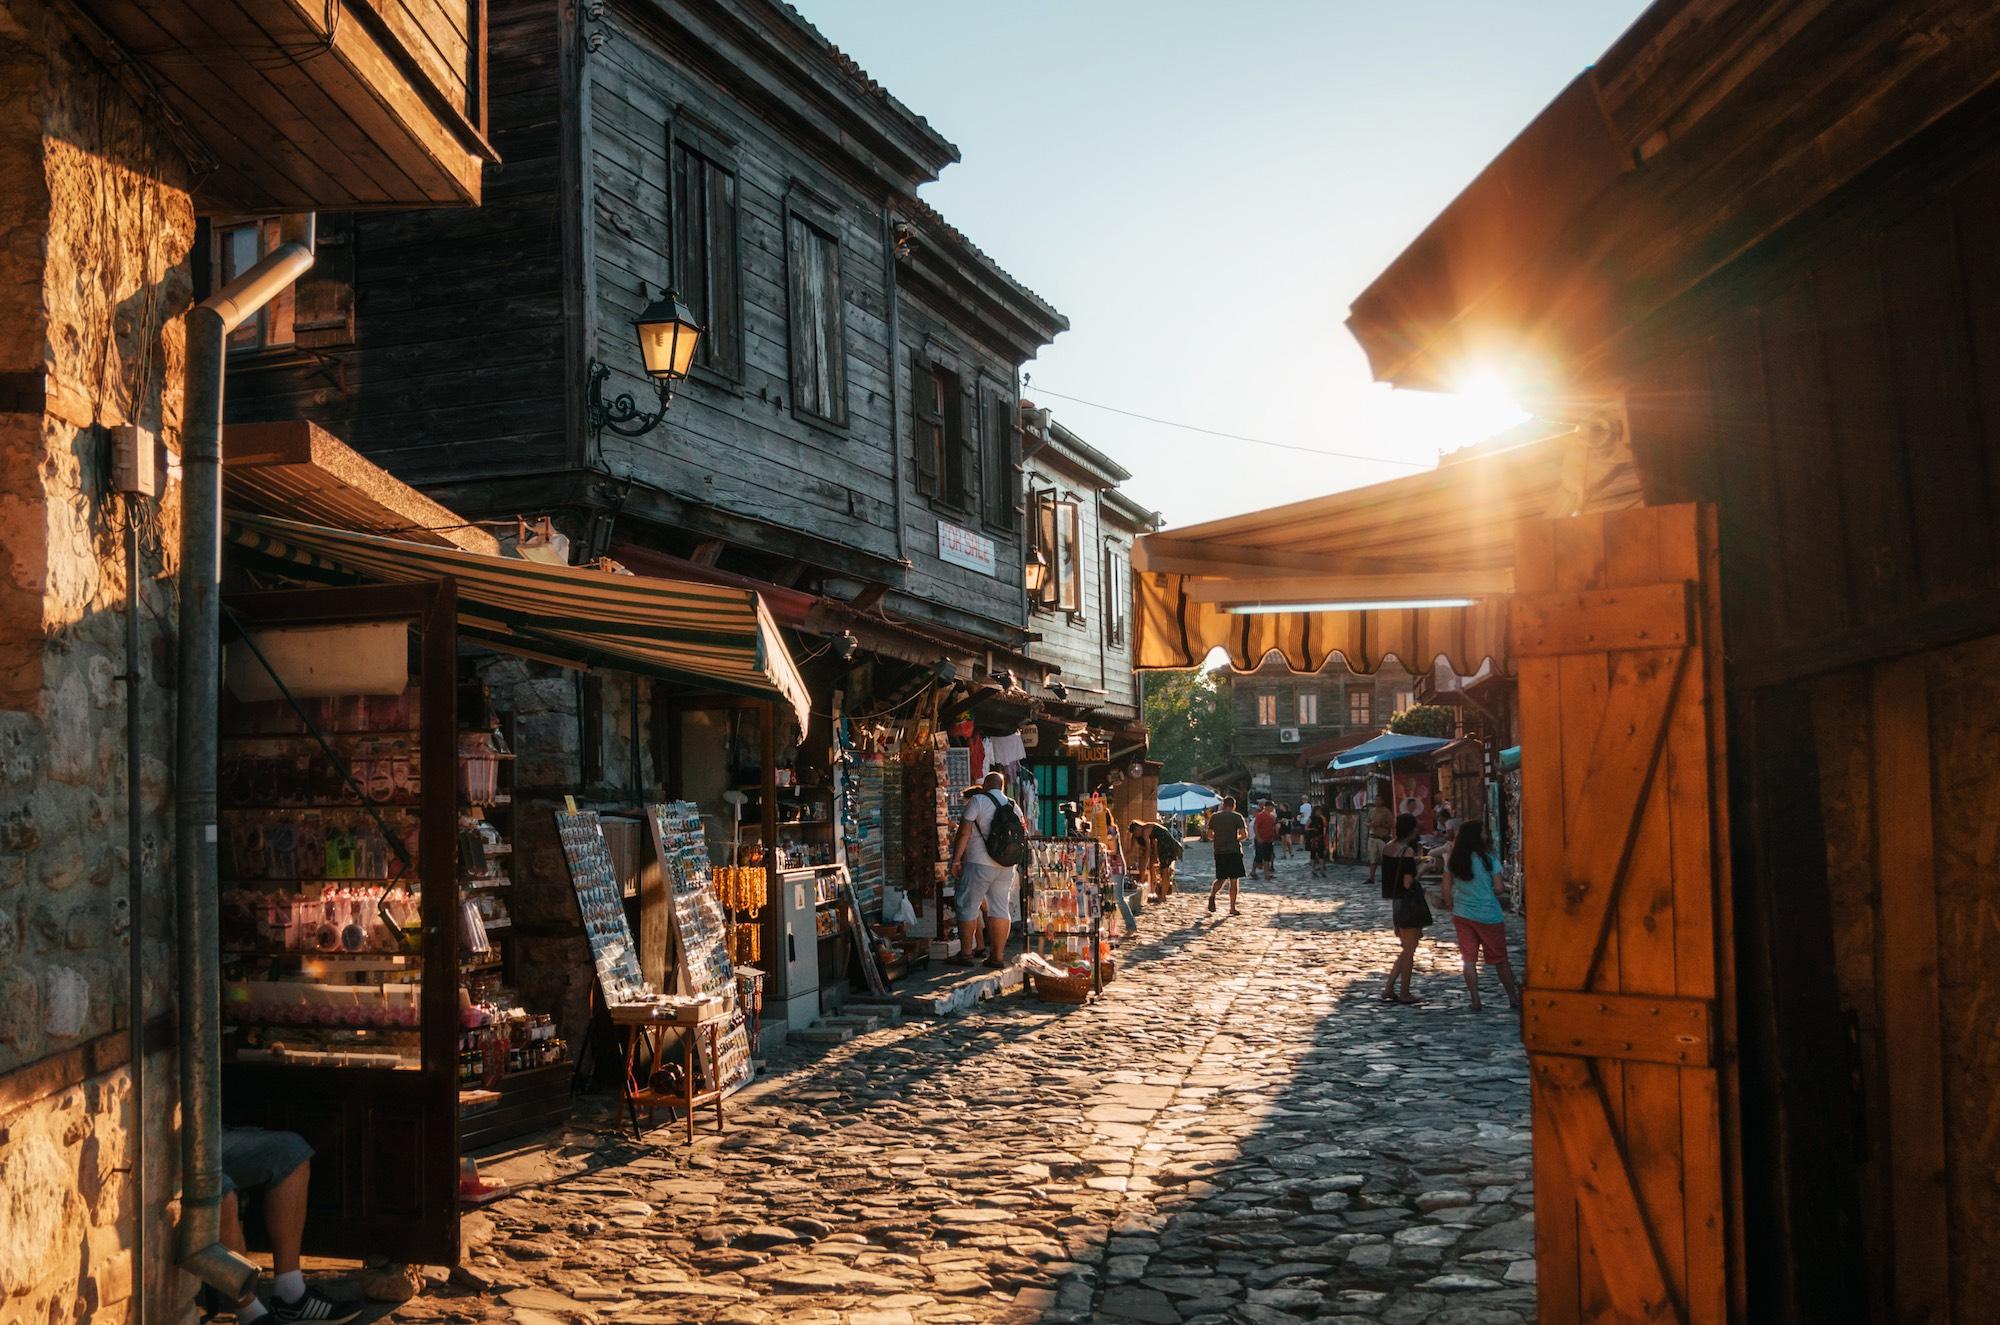 The cobblestone pedestrian streets of ancient Nessebar are filled with cafes, restaurants and souvenir shops. – © Andrei Bortnikau / Shutterstock